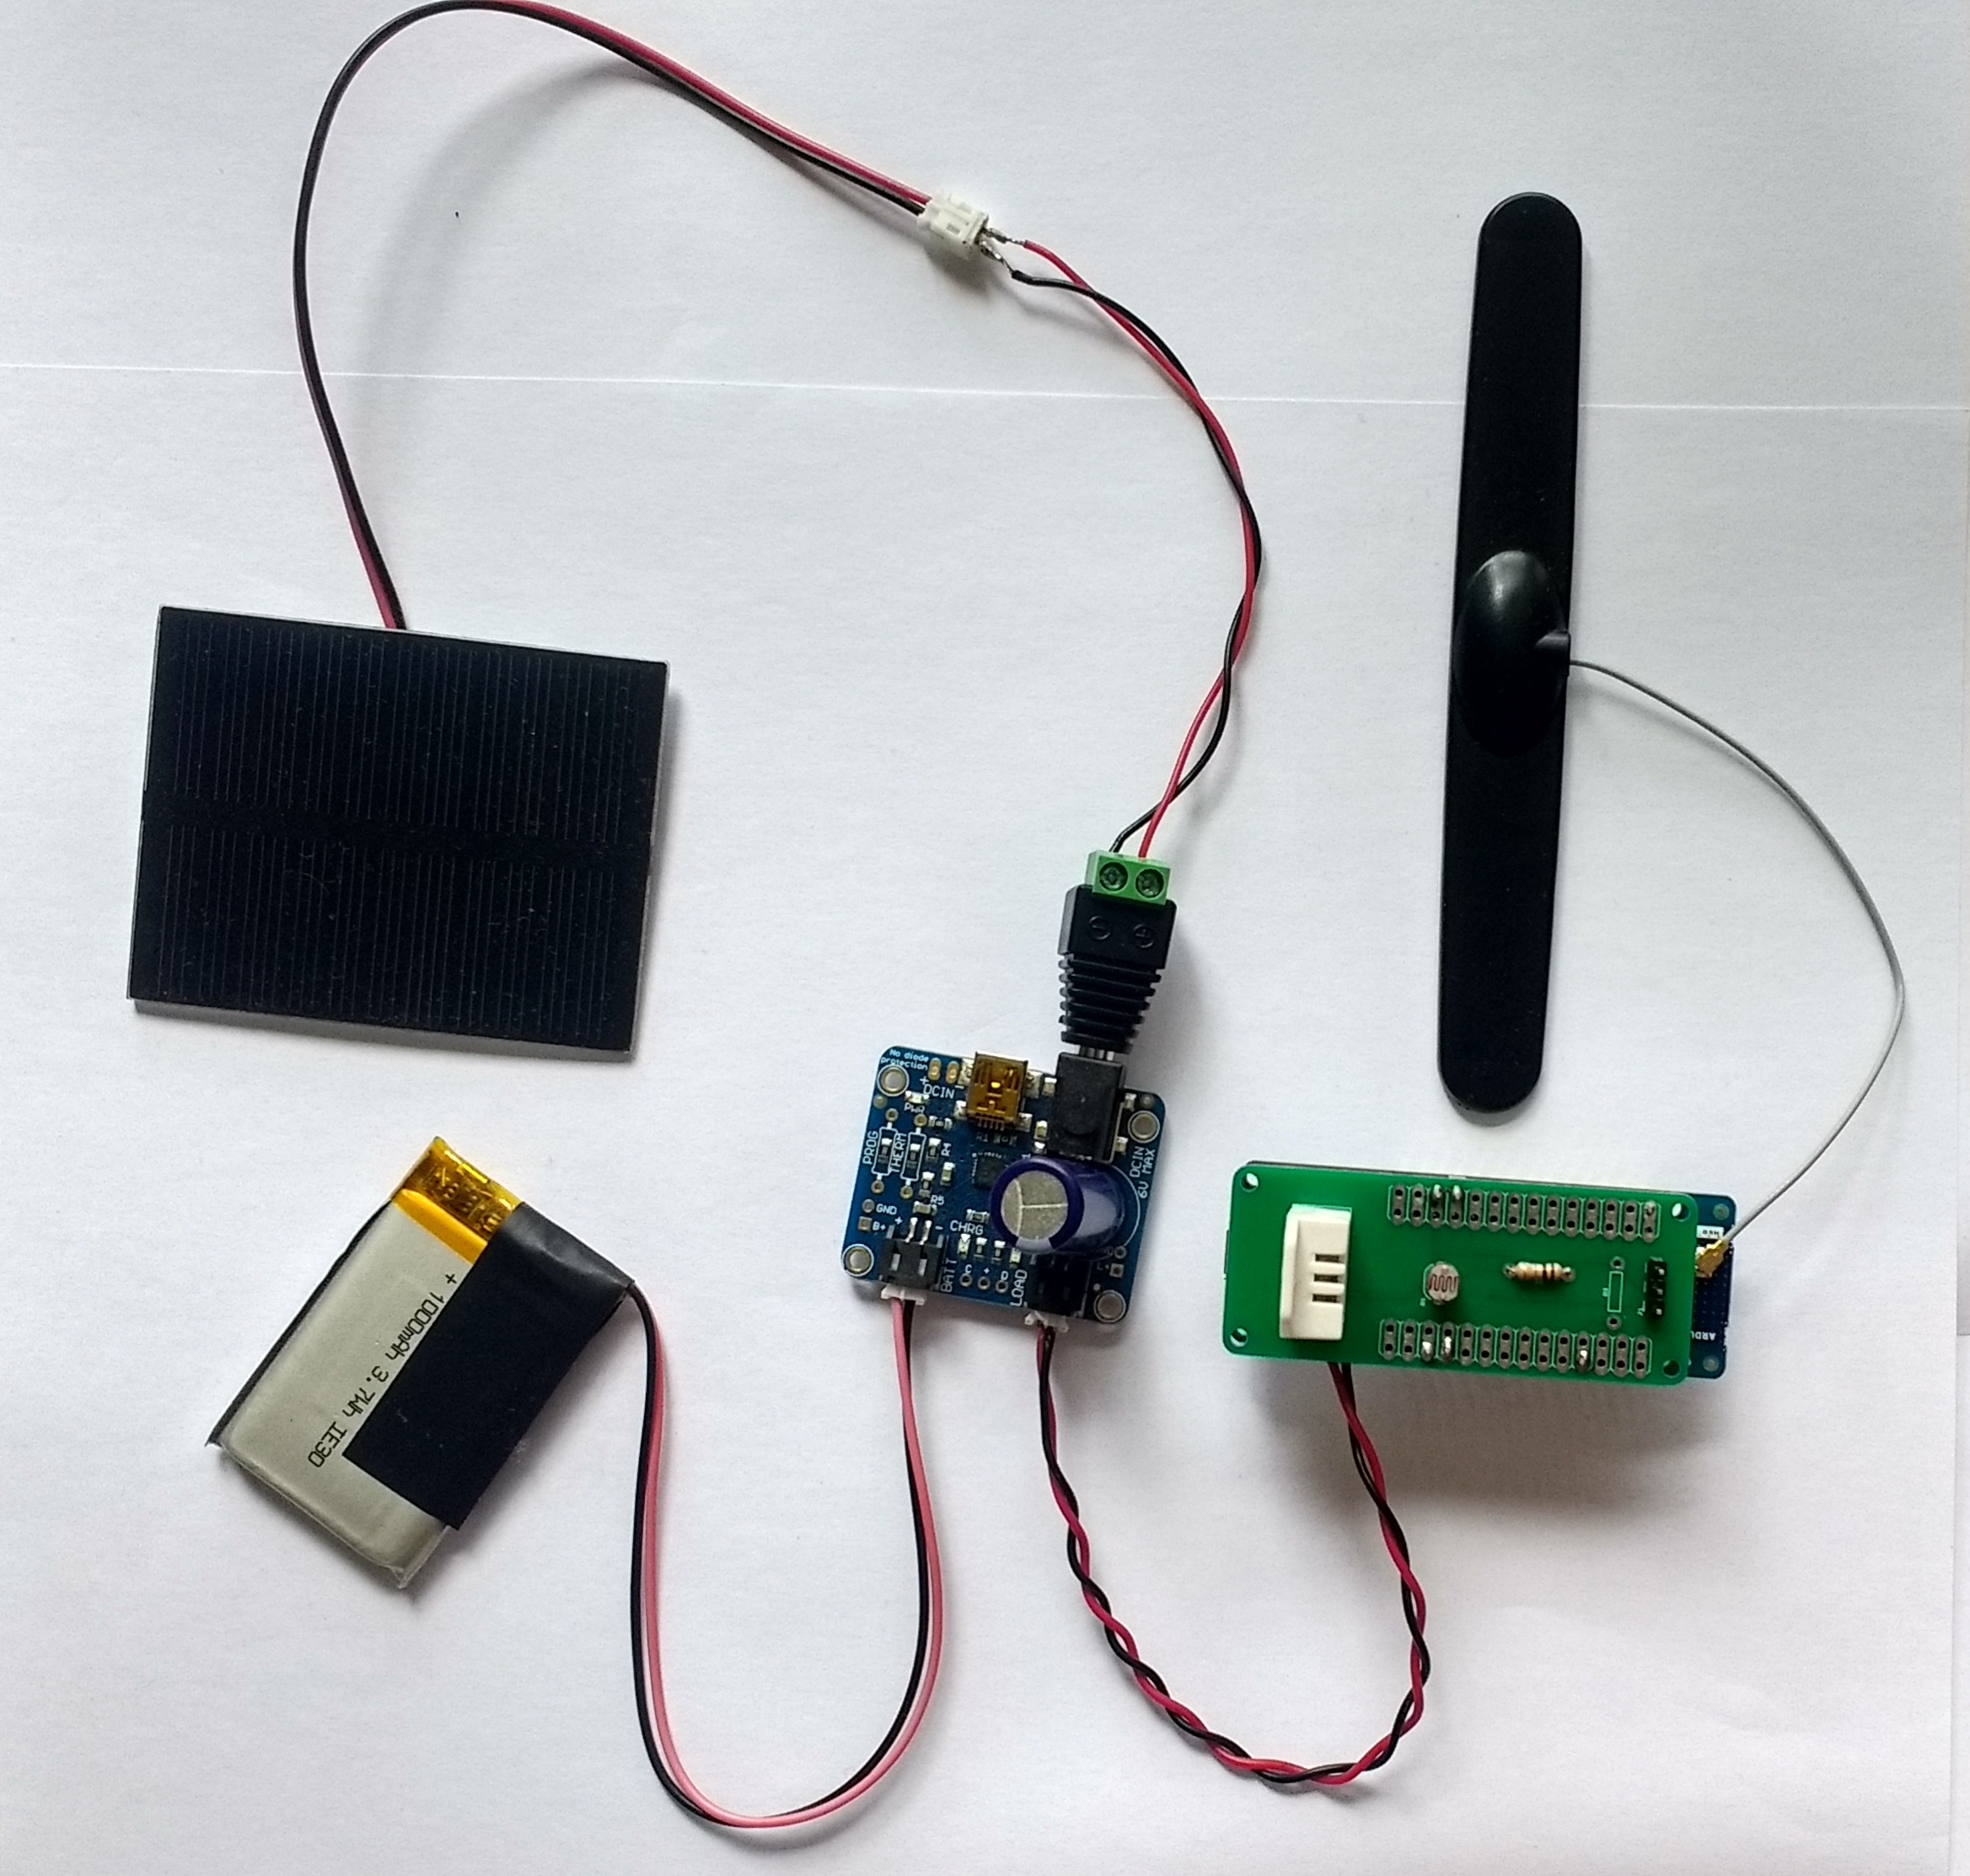 Solar Powering a Connected Sensor Project